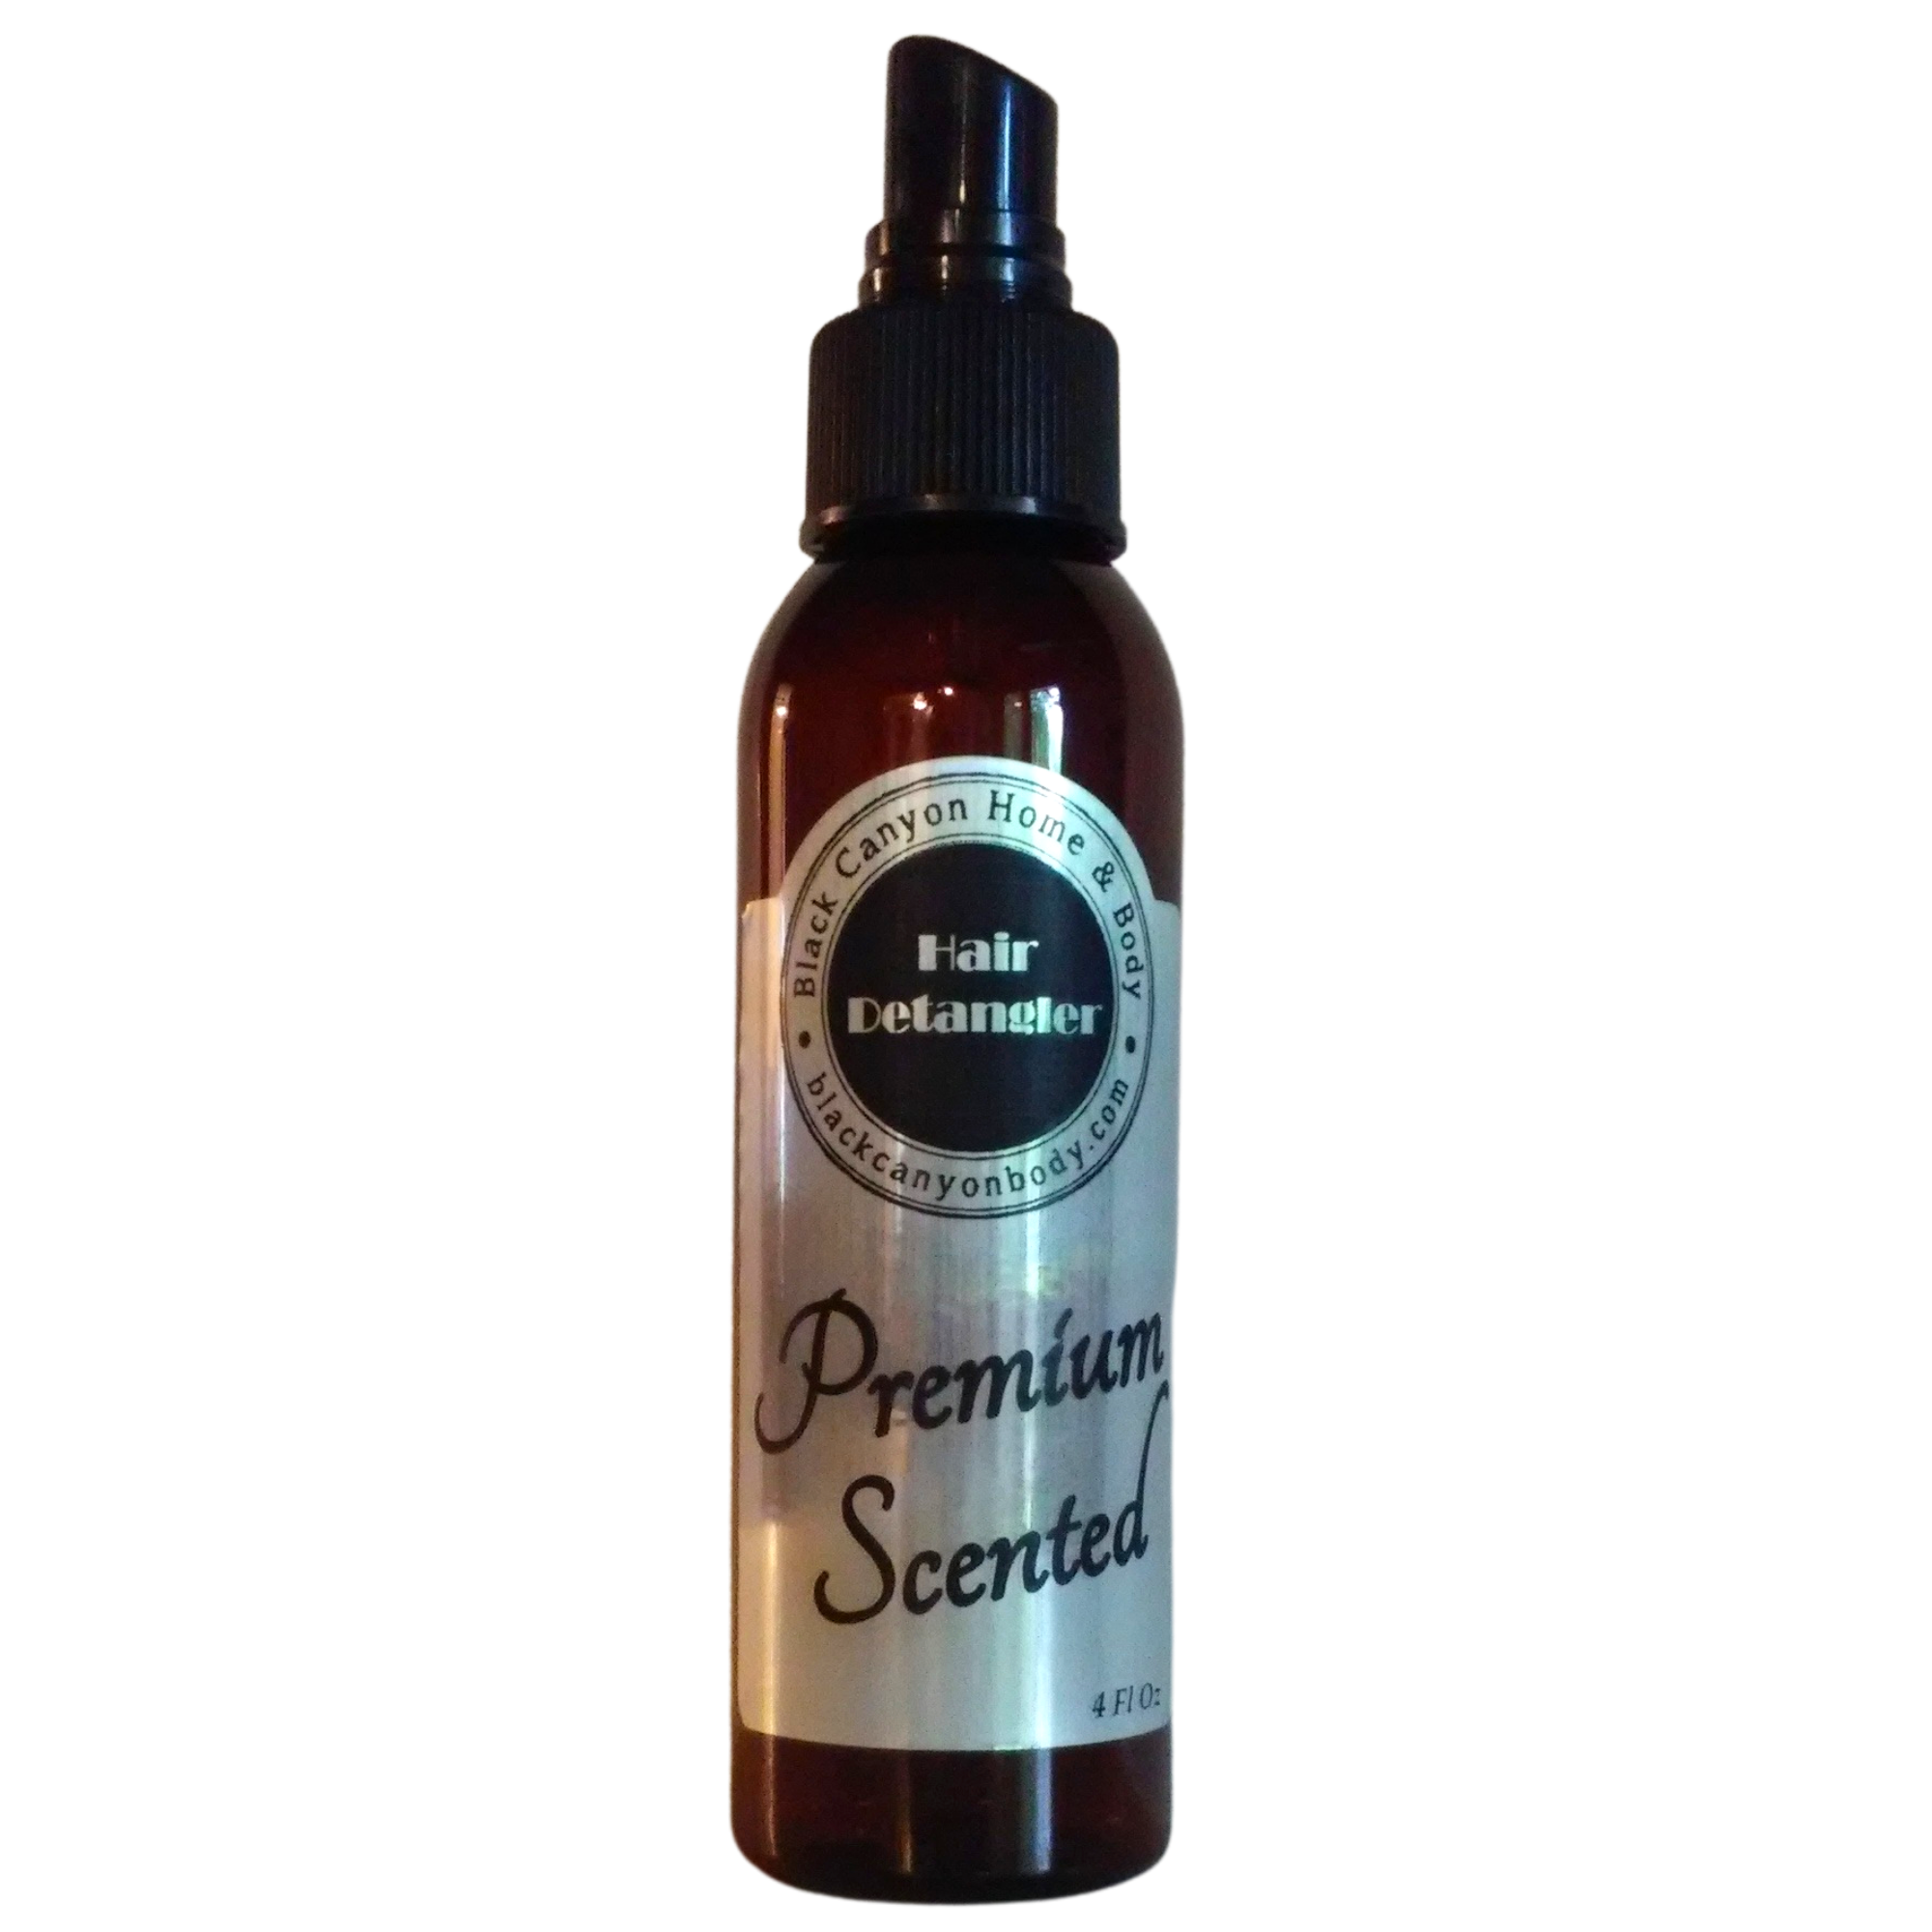 Black Canyon Cookies & Cream Scented Hair Detangler Spray with Olive Oil